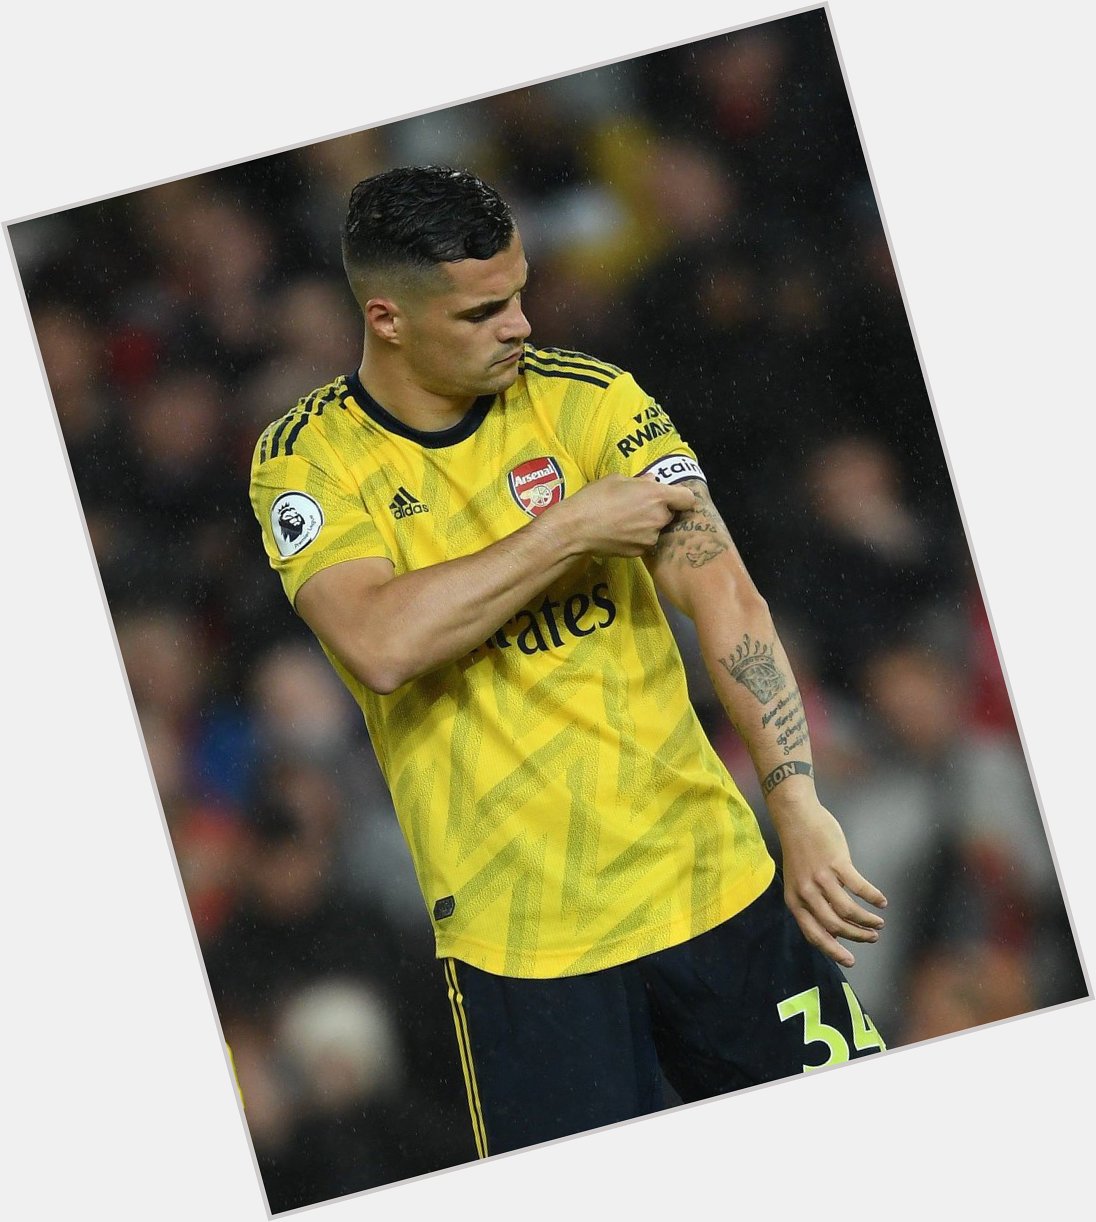 Happy Birthday Granit Xhaka. Deserve more love and respect than you get. 